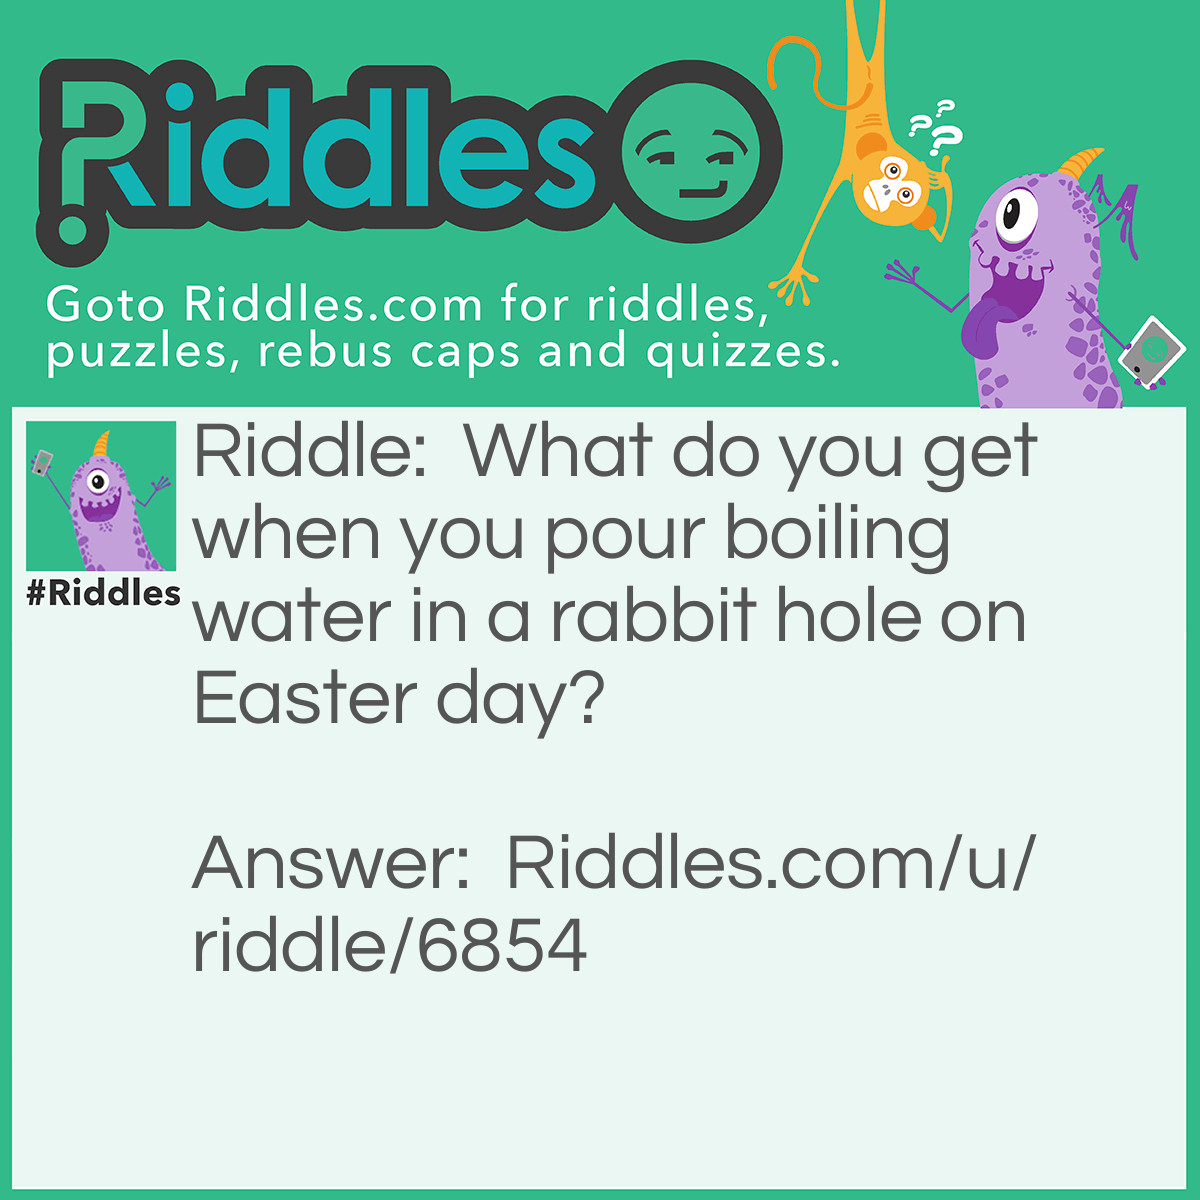 Riddle: What do you get when you pour boiling water in a rabbit hole on Easter day? Answer: Hot cross bun-nies